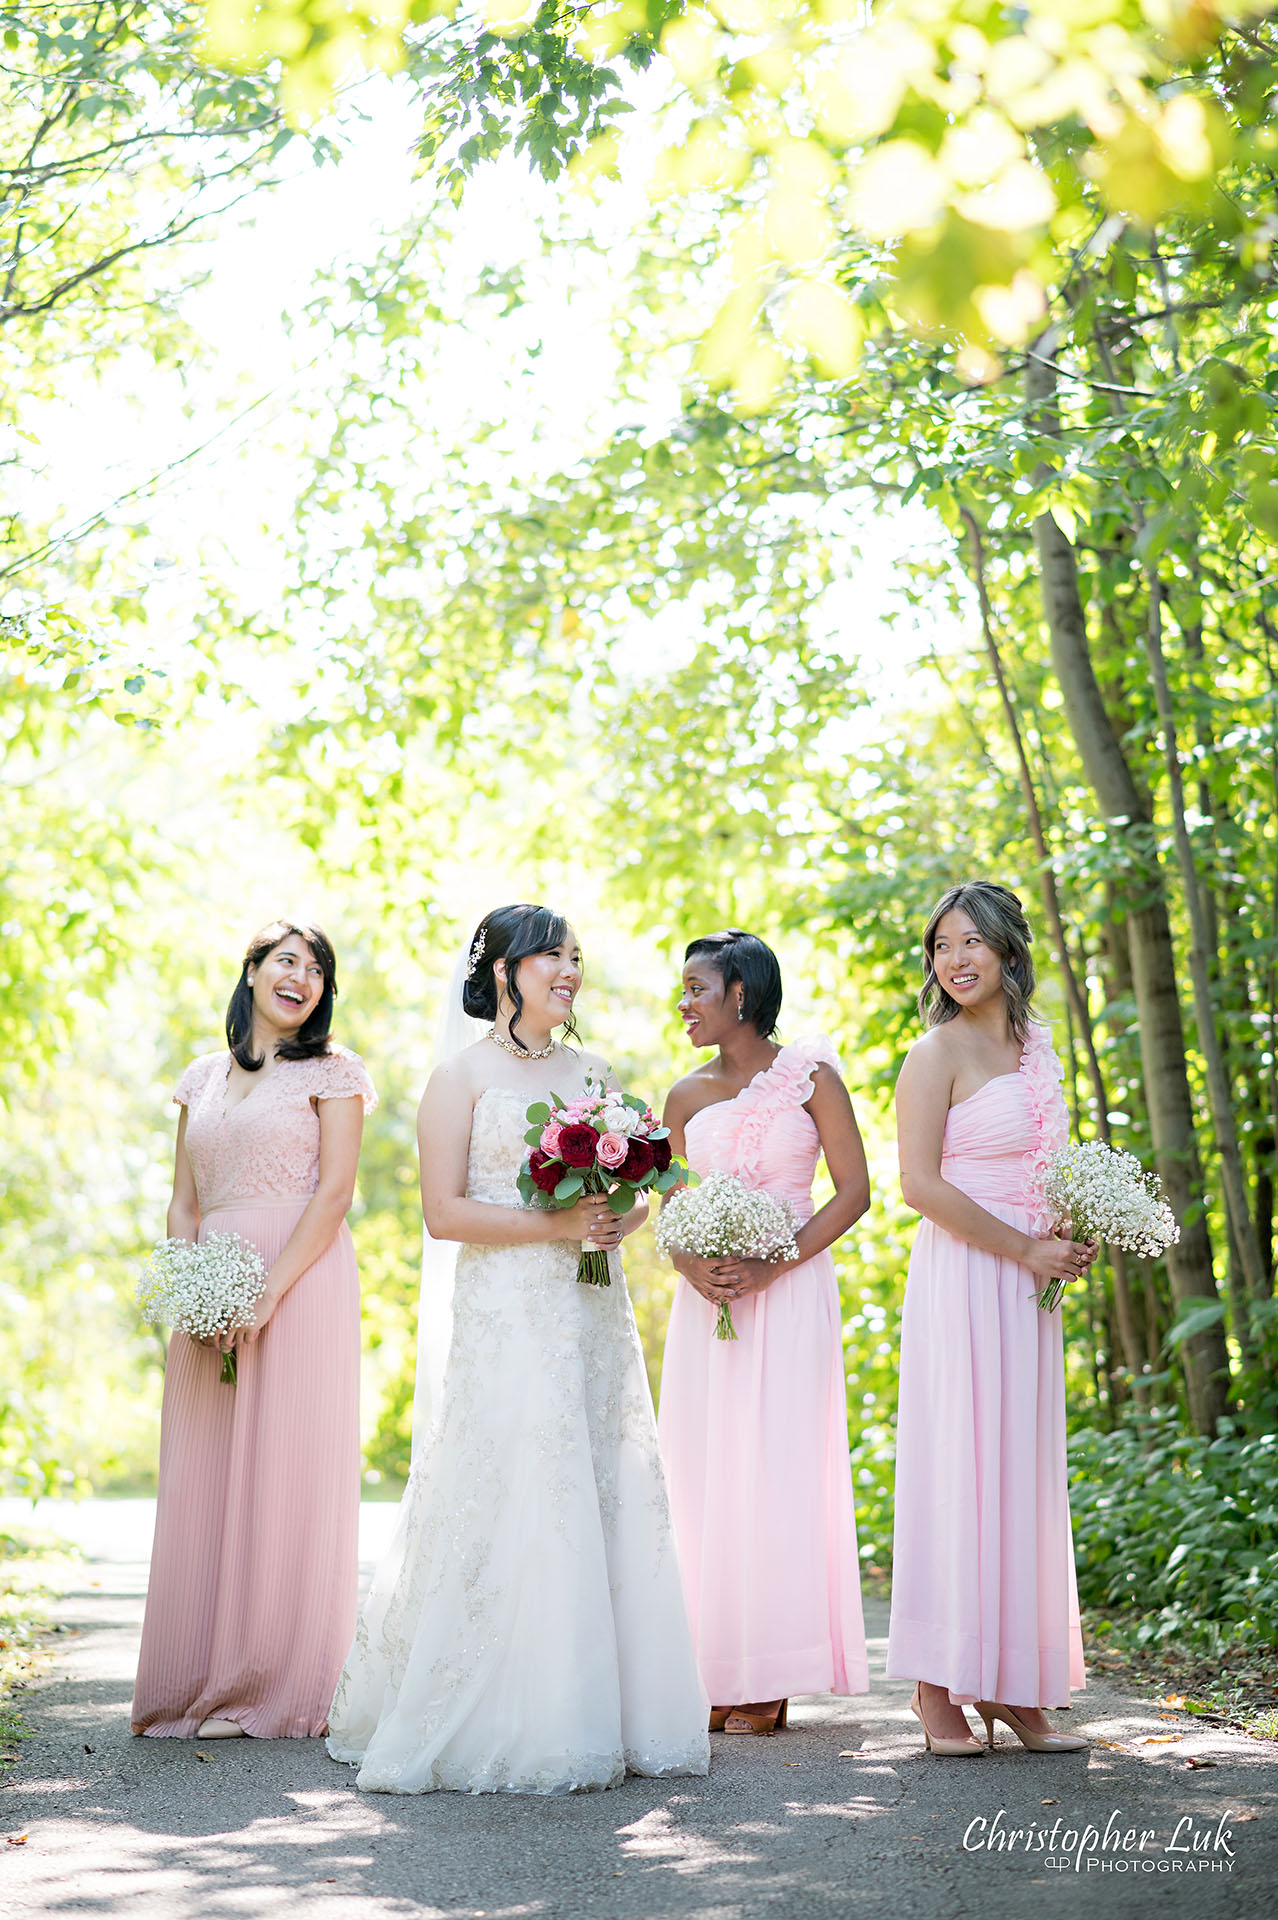 Christopher Luk Toronto Wedding Photographer Bridle Trail Baptist Church Unionville Main Street Crystal Fountain Event Venue Bride Groom Natural Photojournalistic Candid Creative Portrait Session Pictures Bridal Party Maid of Honour Bridesmaids Forest Smiling Vertical 